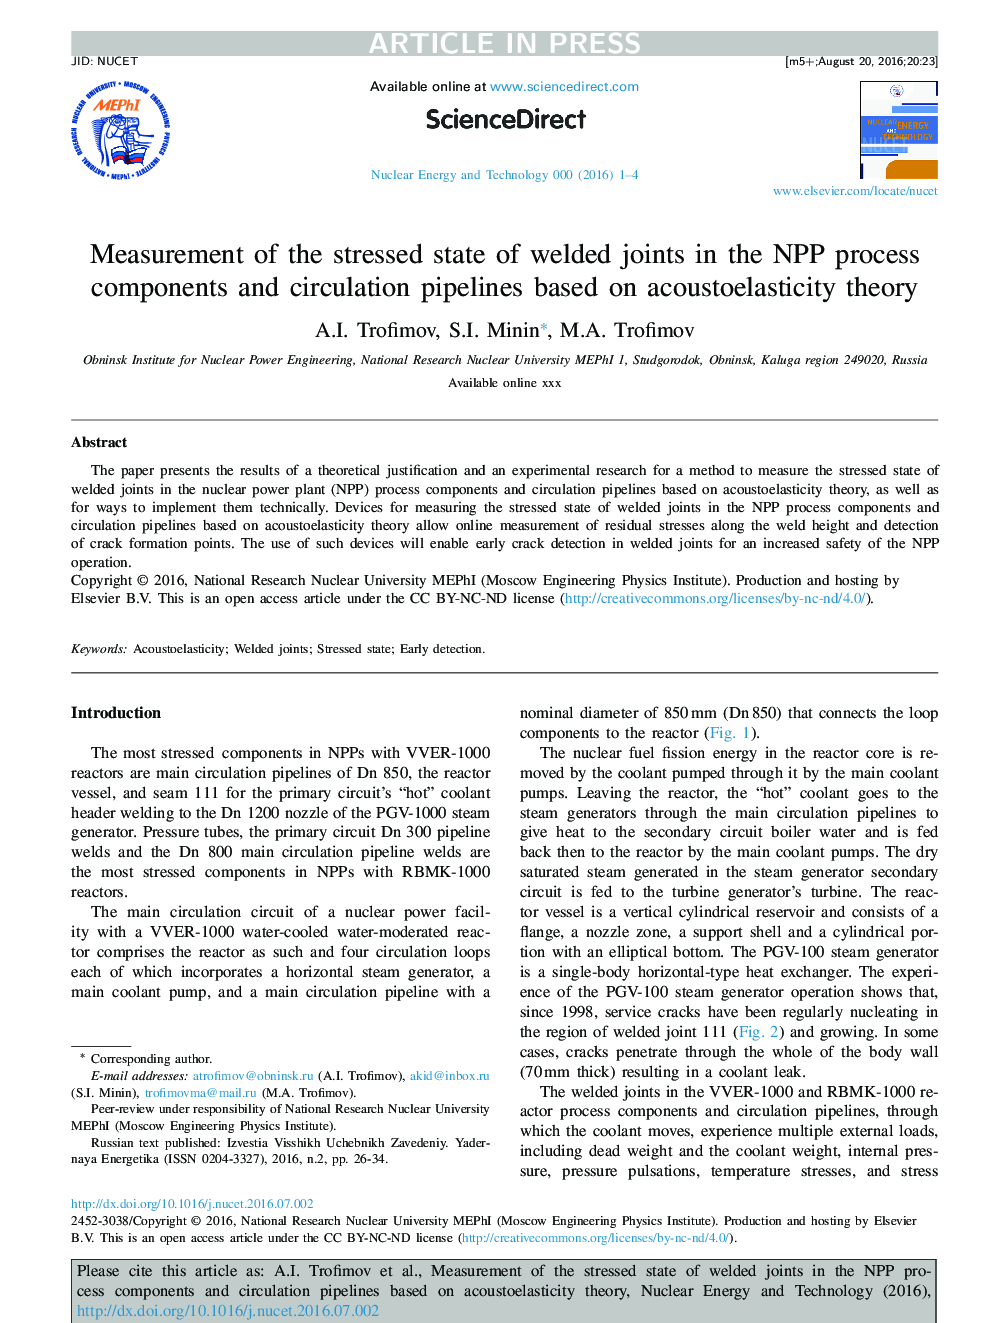 Measurement of the stressed state of welded joints in the NPP process components and circulation pipelines based on acoustoelasticity theory